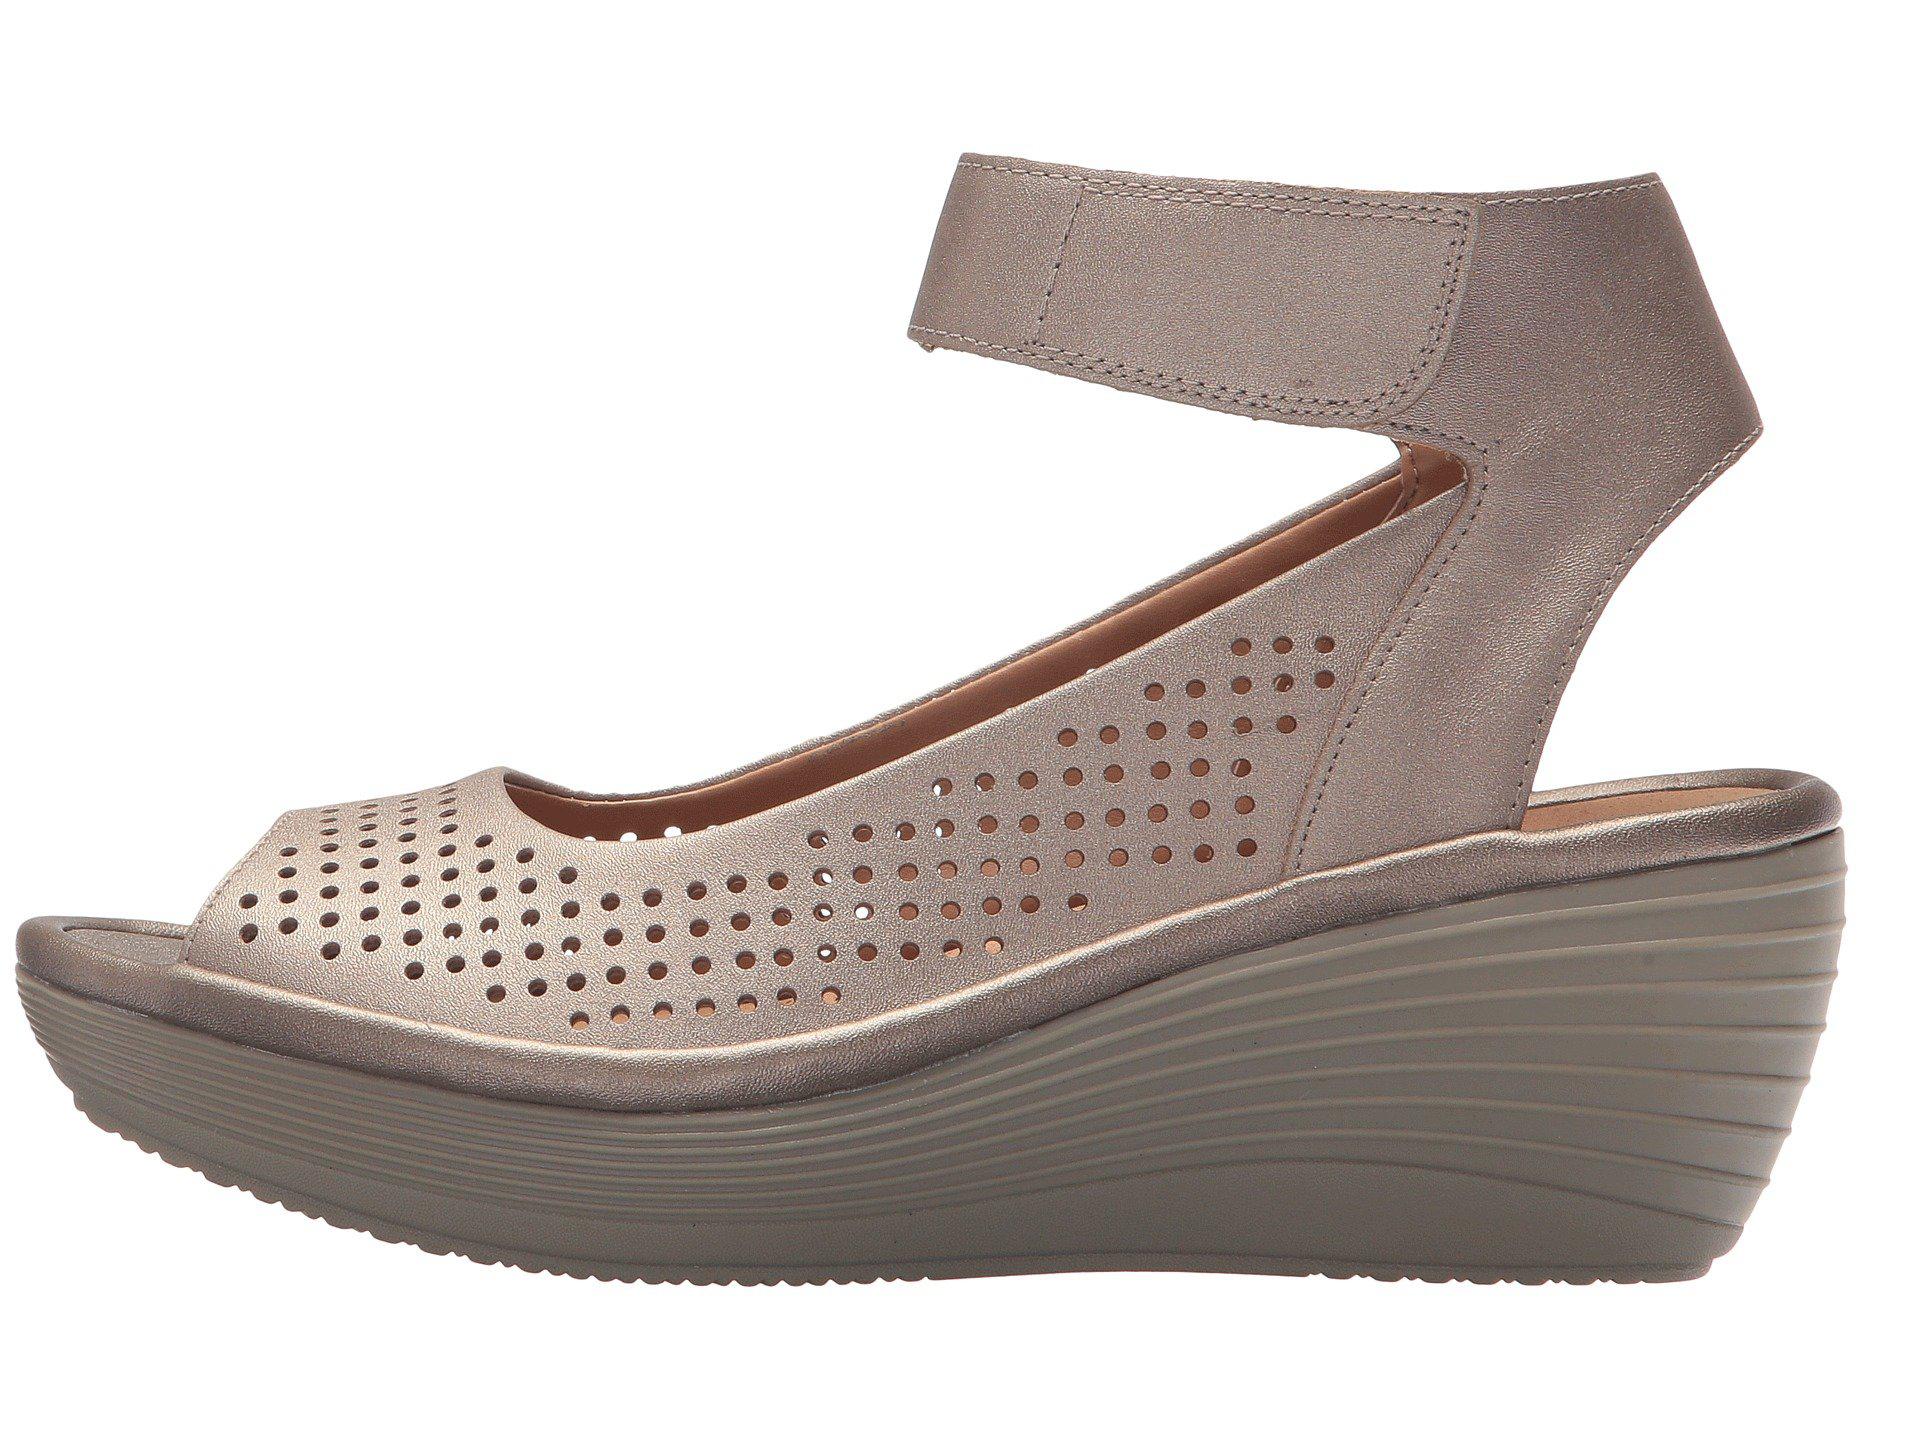 Clarks Leather Reedly Salene Wedge Sandal in Pewter Leather (Brown) - Lyst